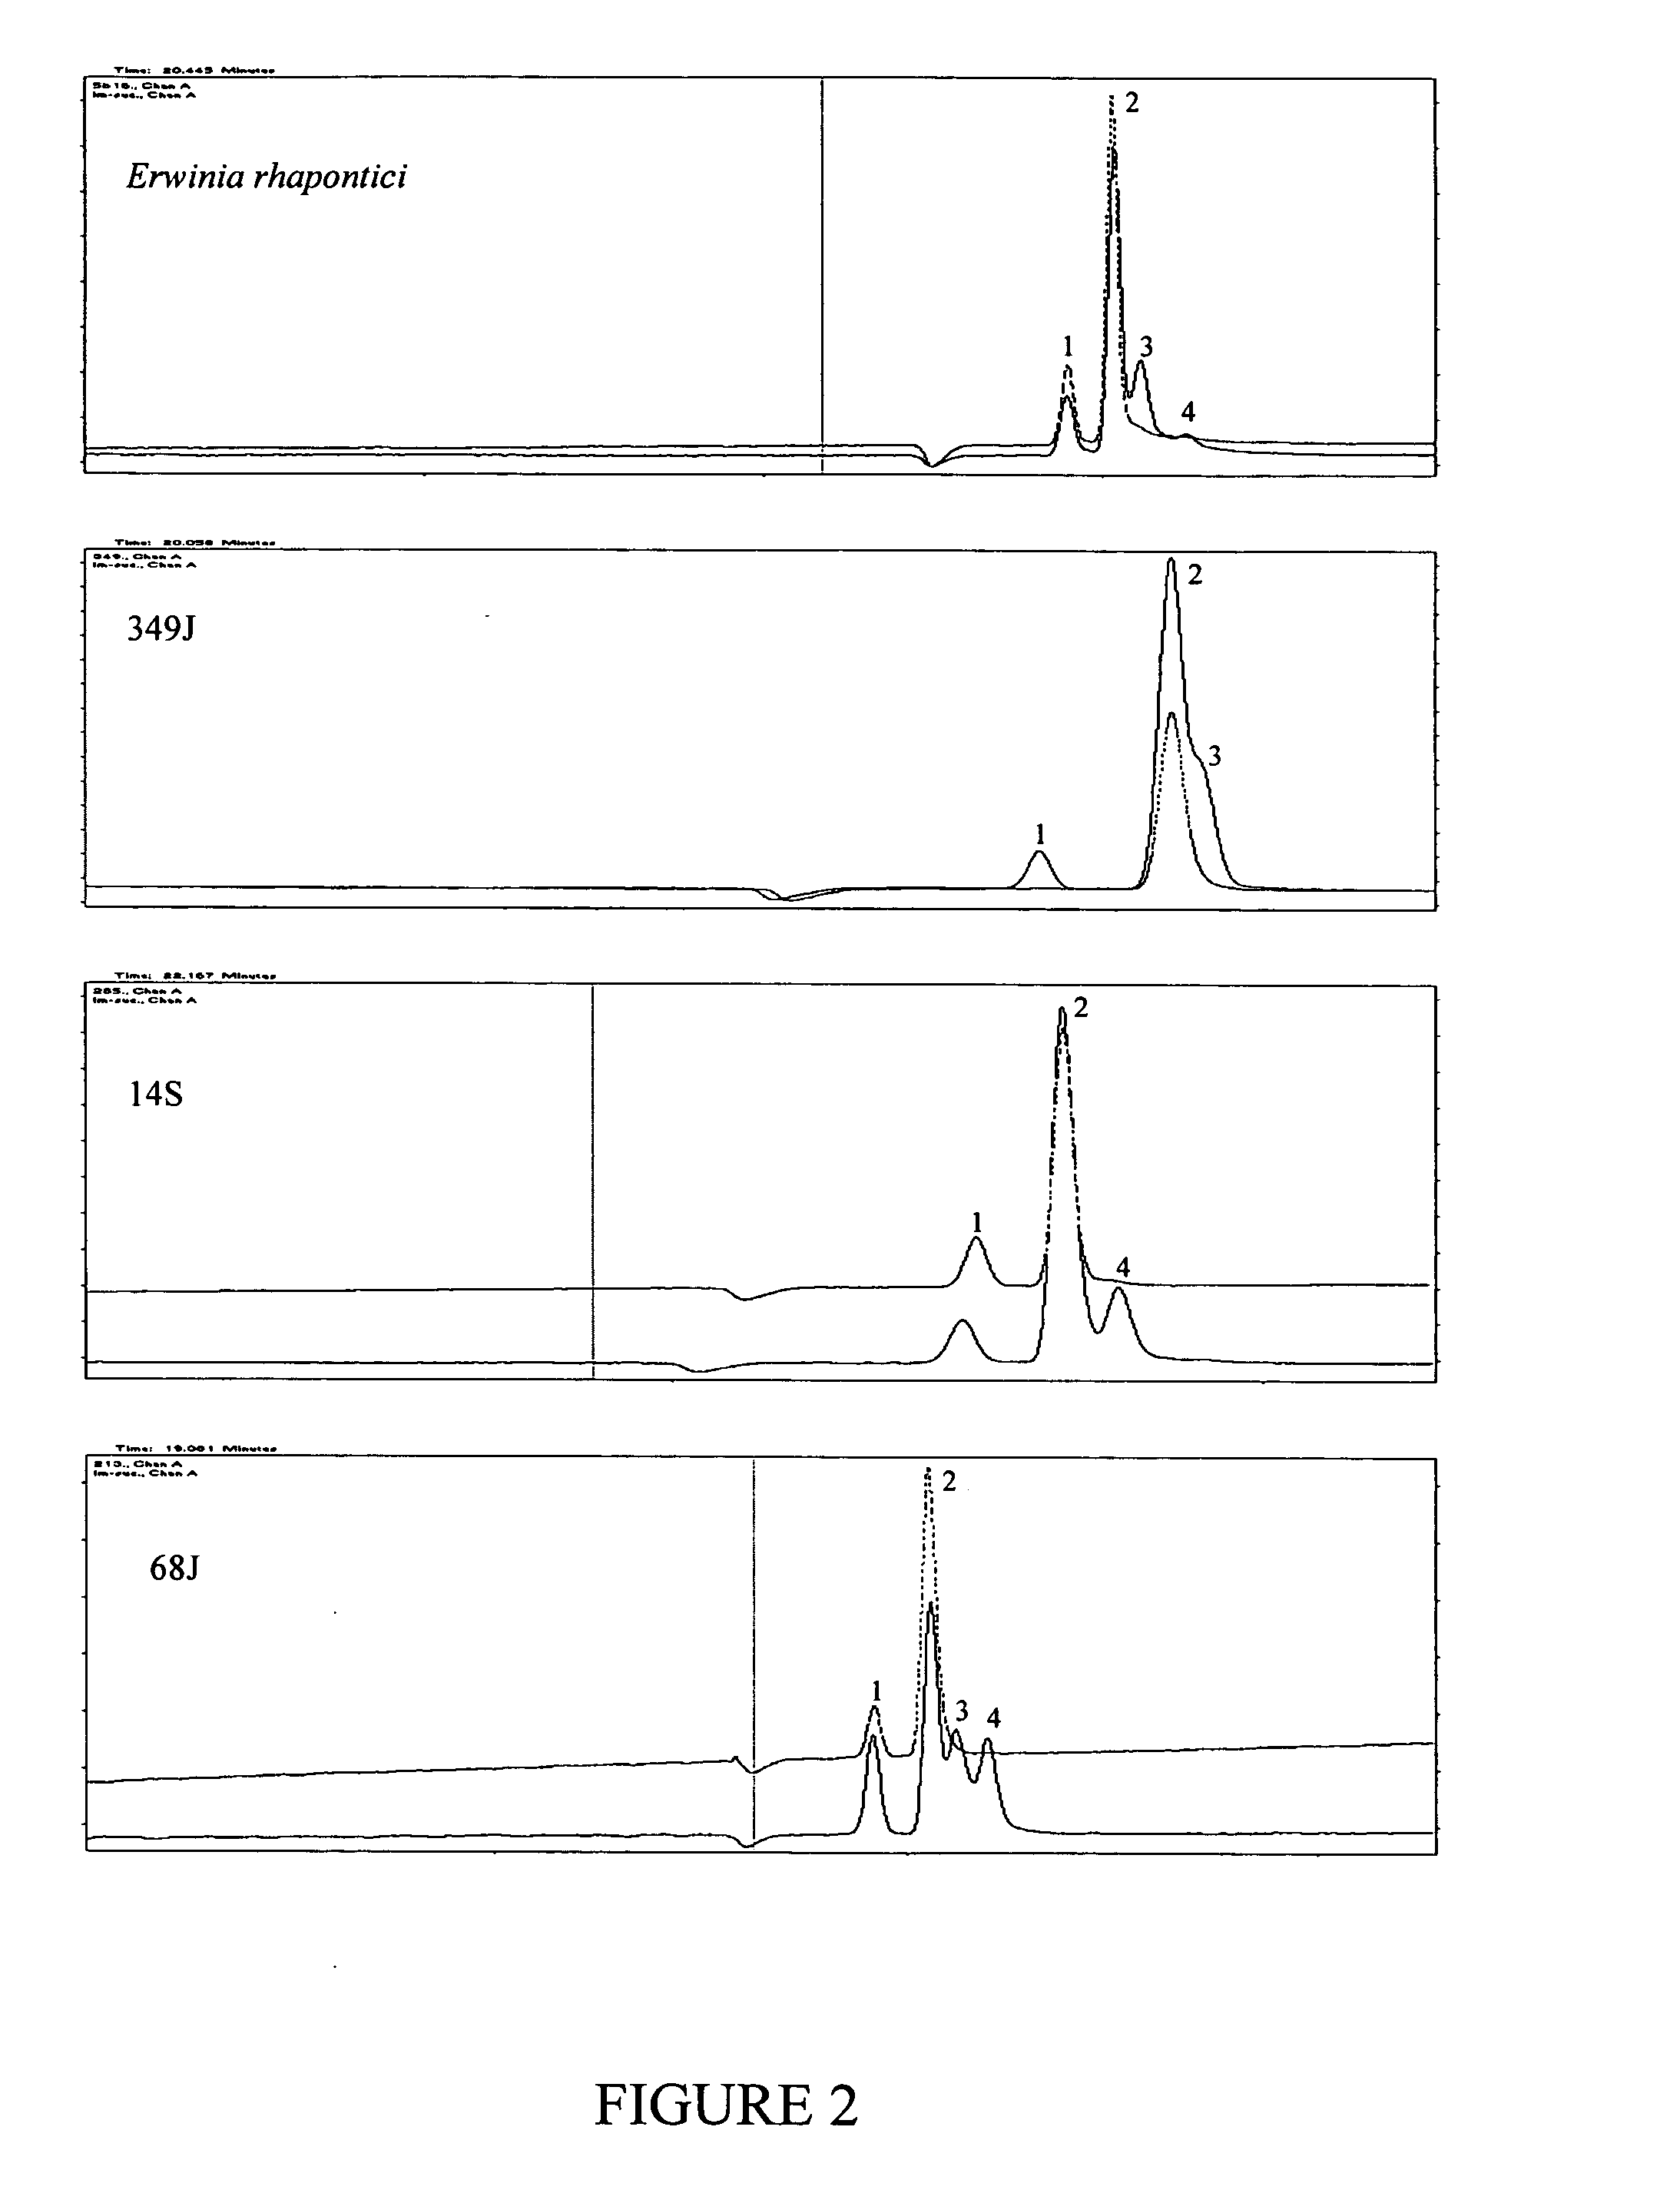 Isomaltulose synthases, polynucleotides encoding them and uses therefor